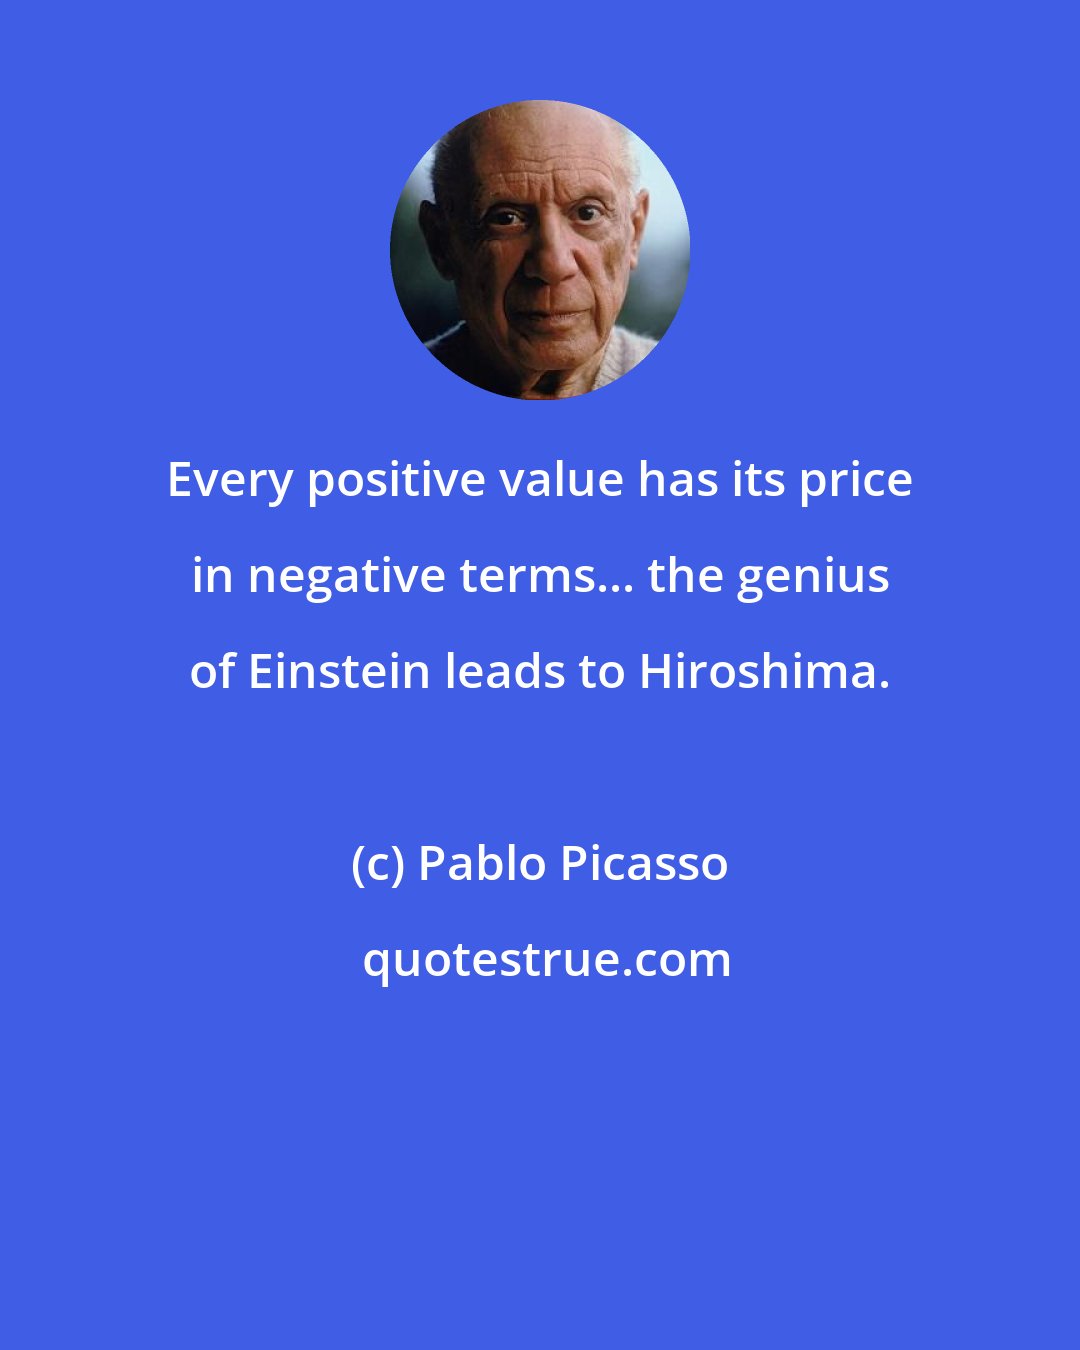 Pablo Picasso: Every positive value has its price in negative terms... the genius of Einstein leads to Hiroshima.